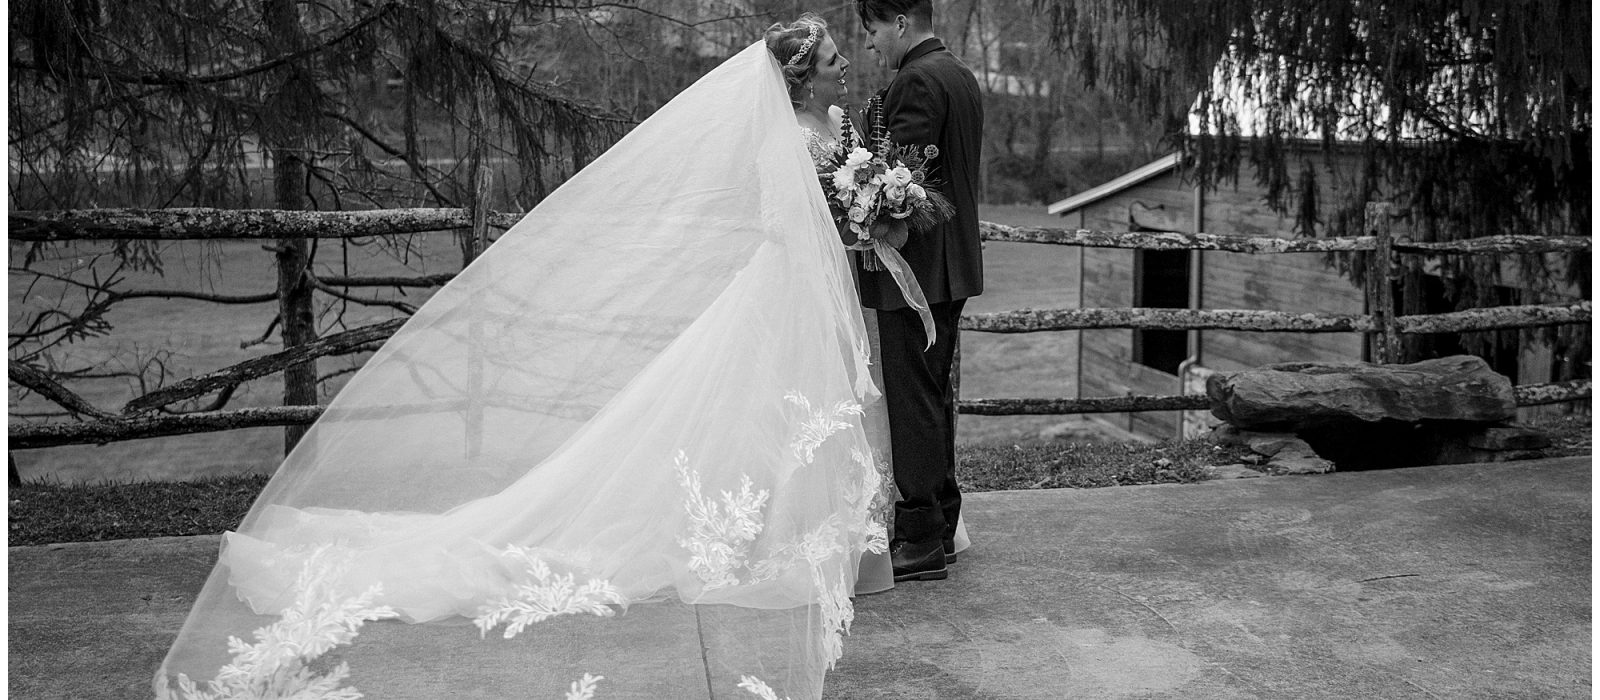 Winter wedding with snow flurries at Honeysuckle Hill | Kathy Beaver Photography